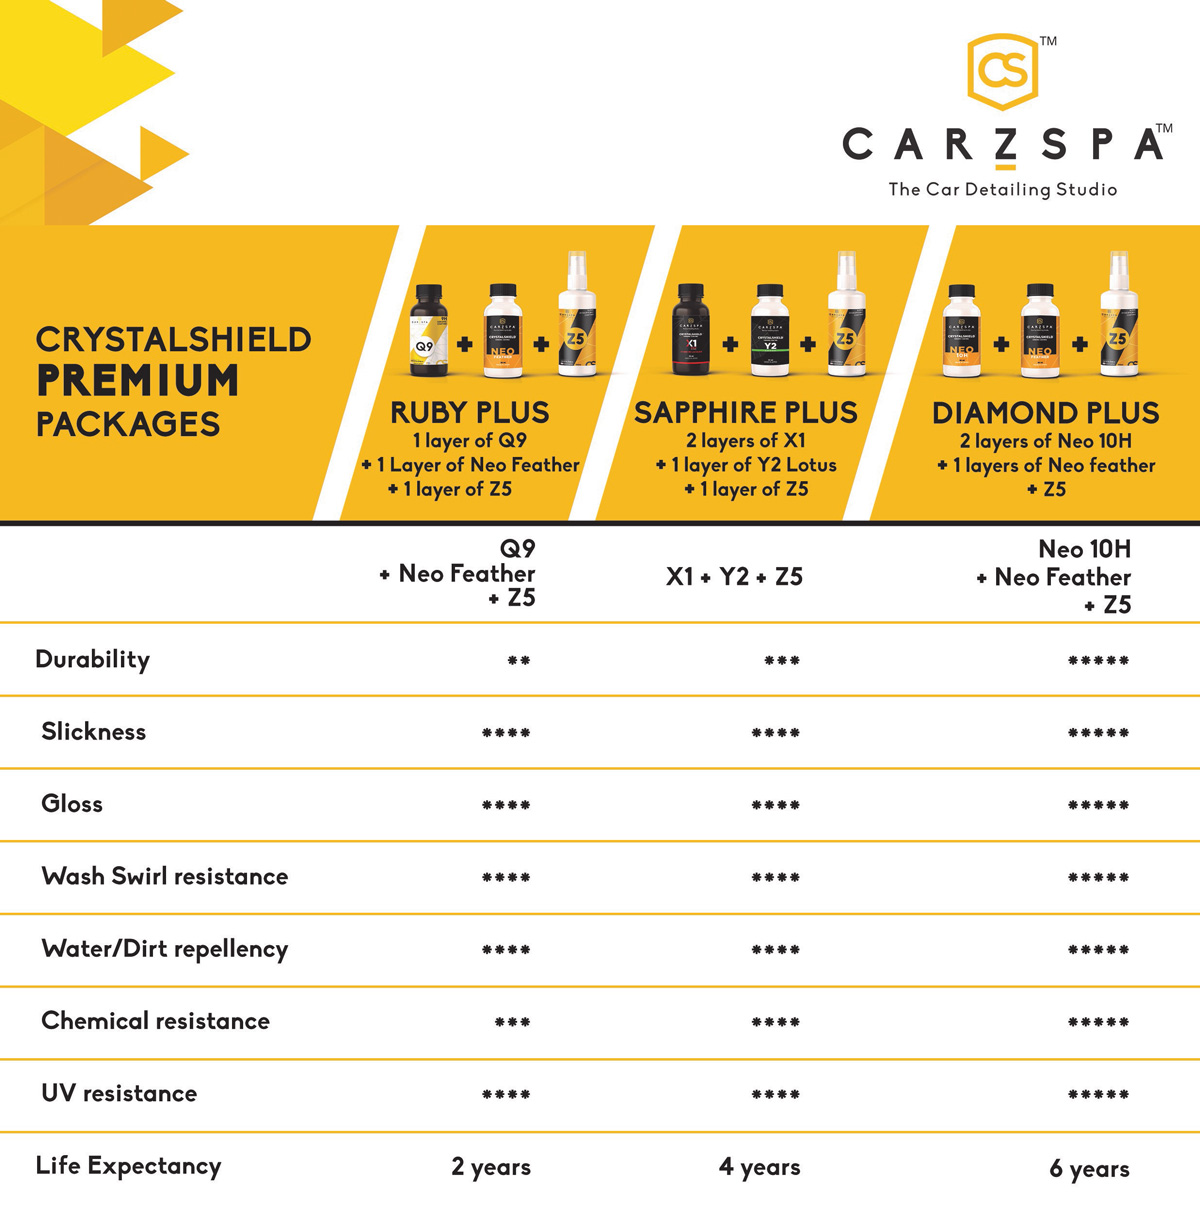 Carzspa crystalshield packages